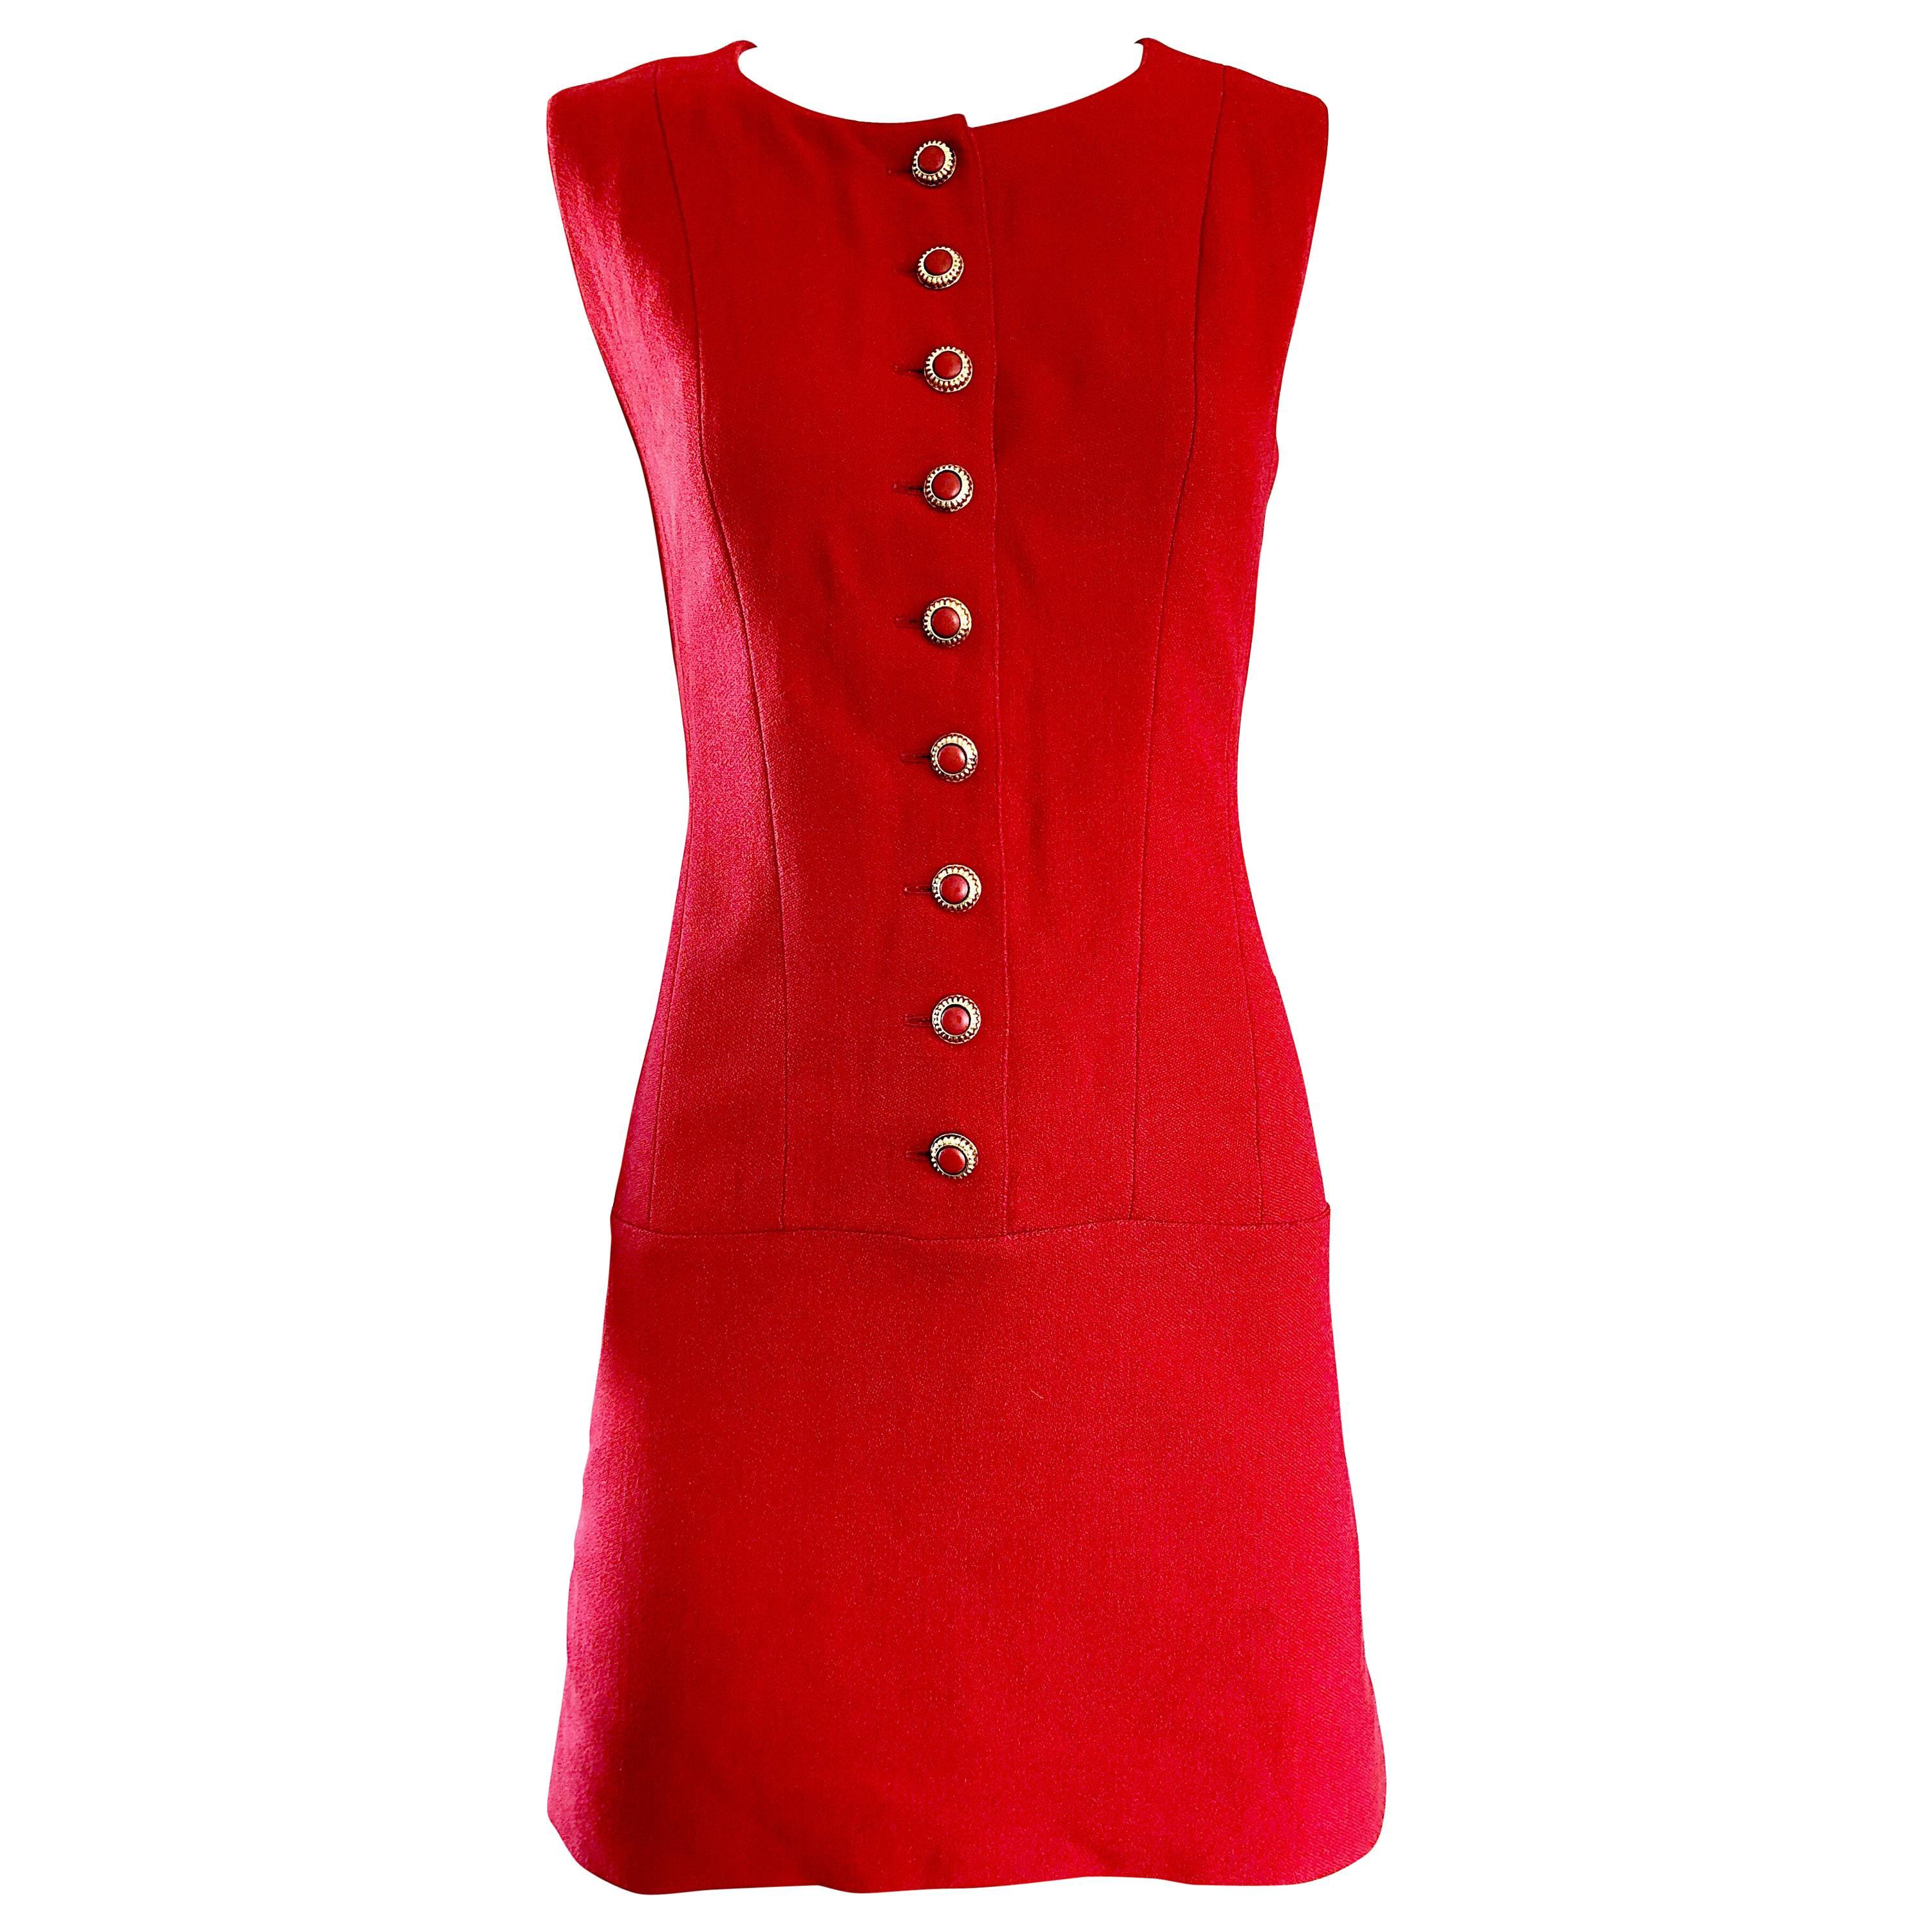 Karl Lagerfeld Chic Vintage  1990s Does 1960s Lipstick Red Wool Mini Shift Dress